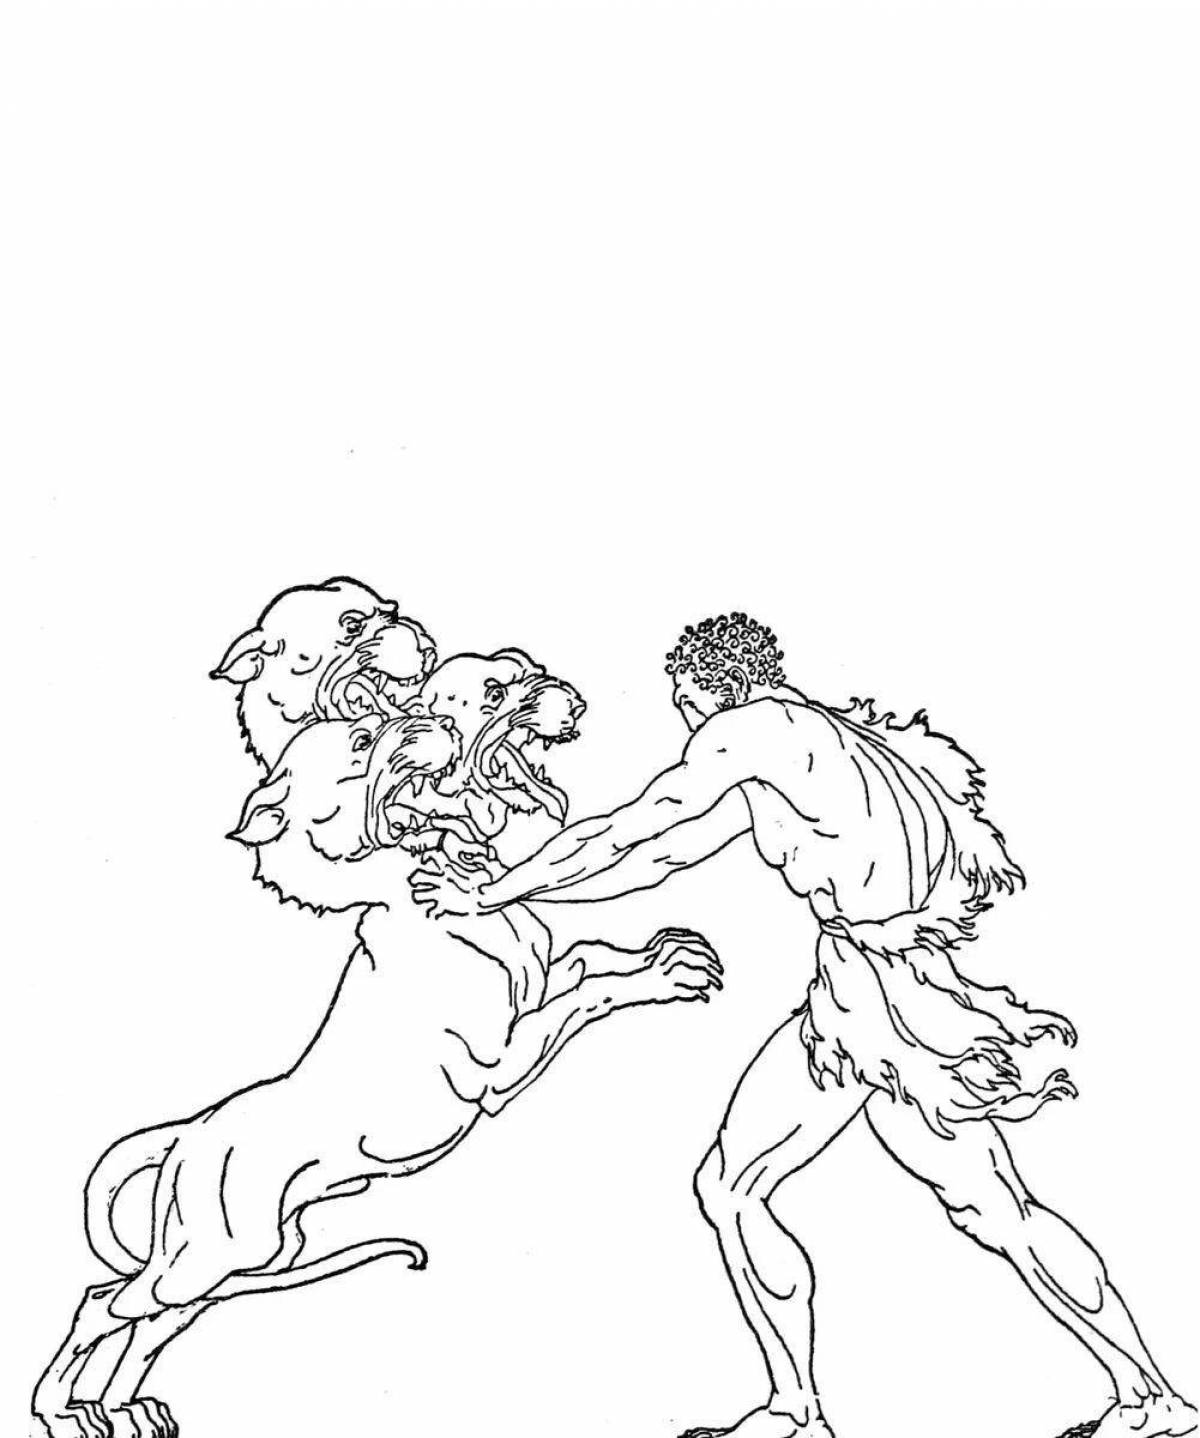 Greatly colored 12 labors of hercules coloring page